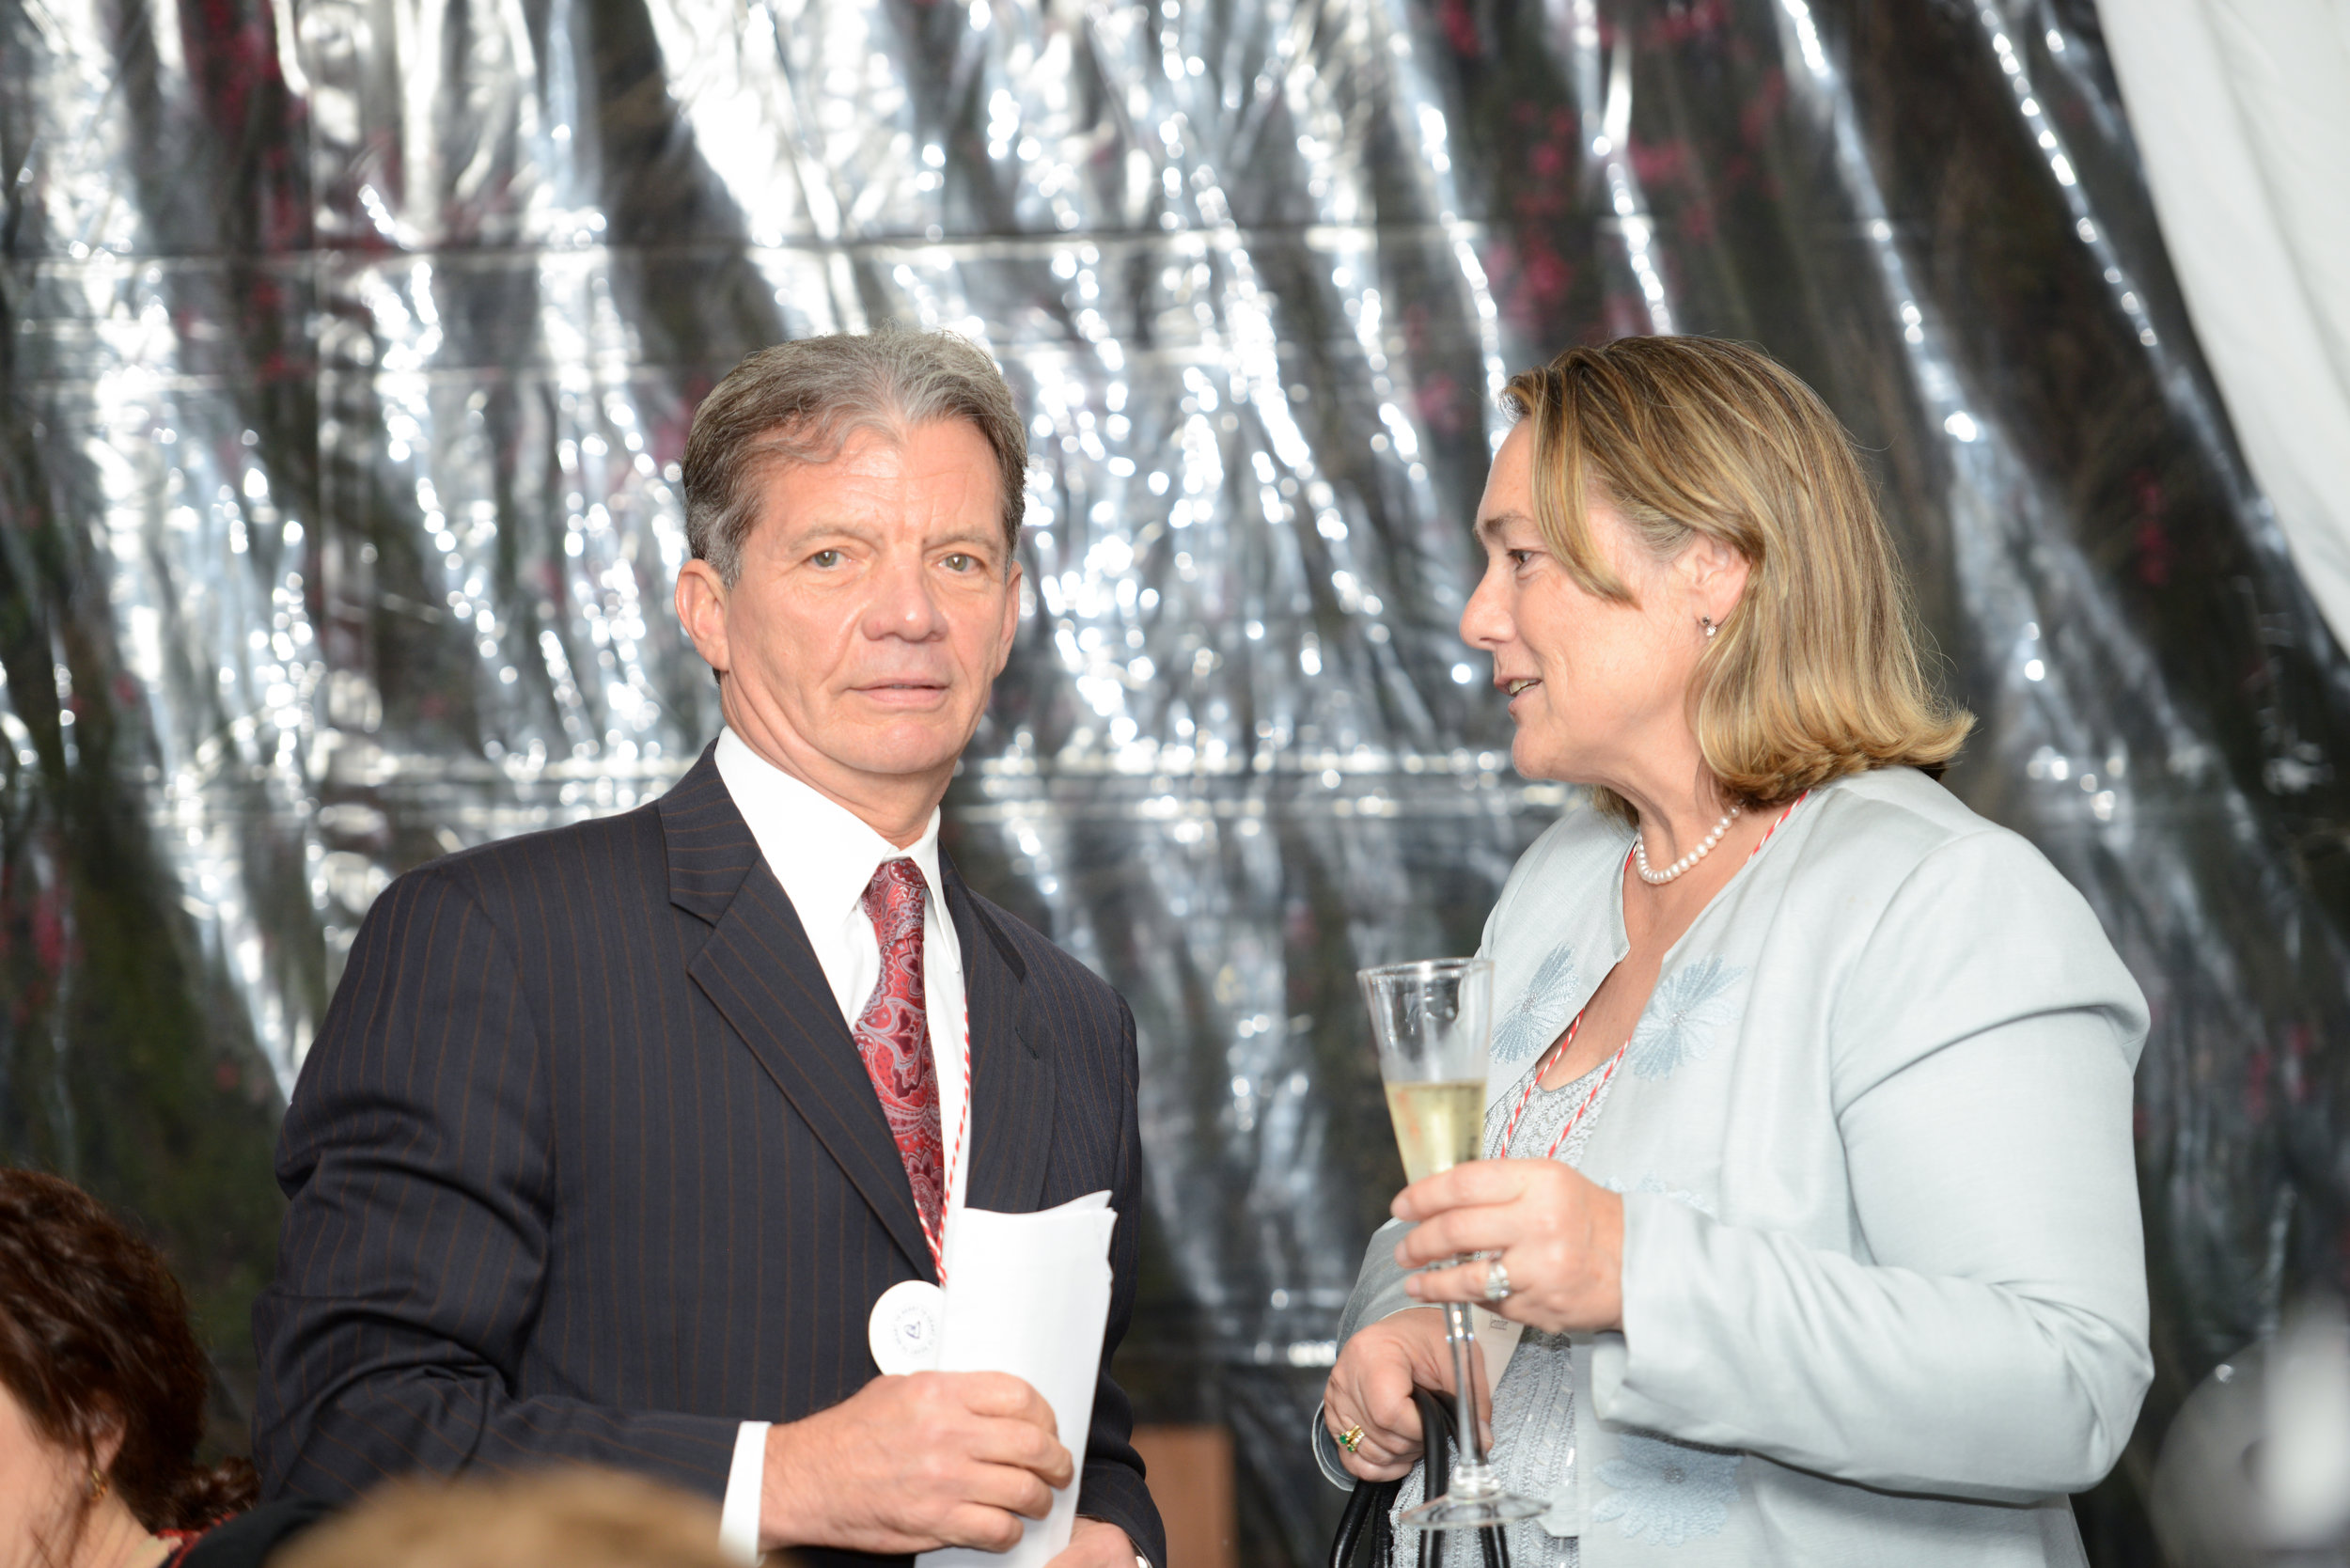 Nilas Young, MD and Jennifer Osborne Share a Moment